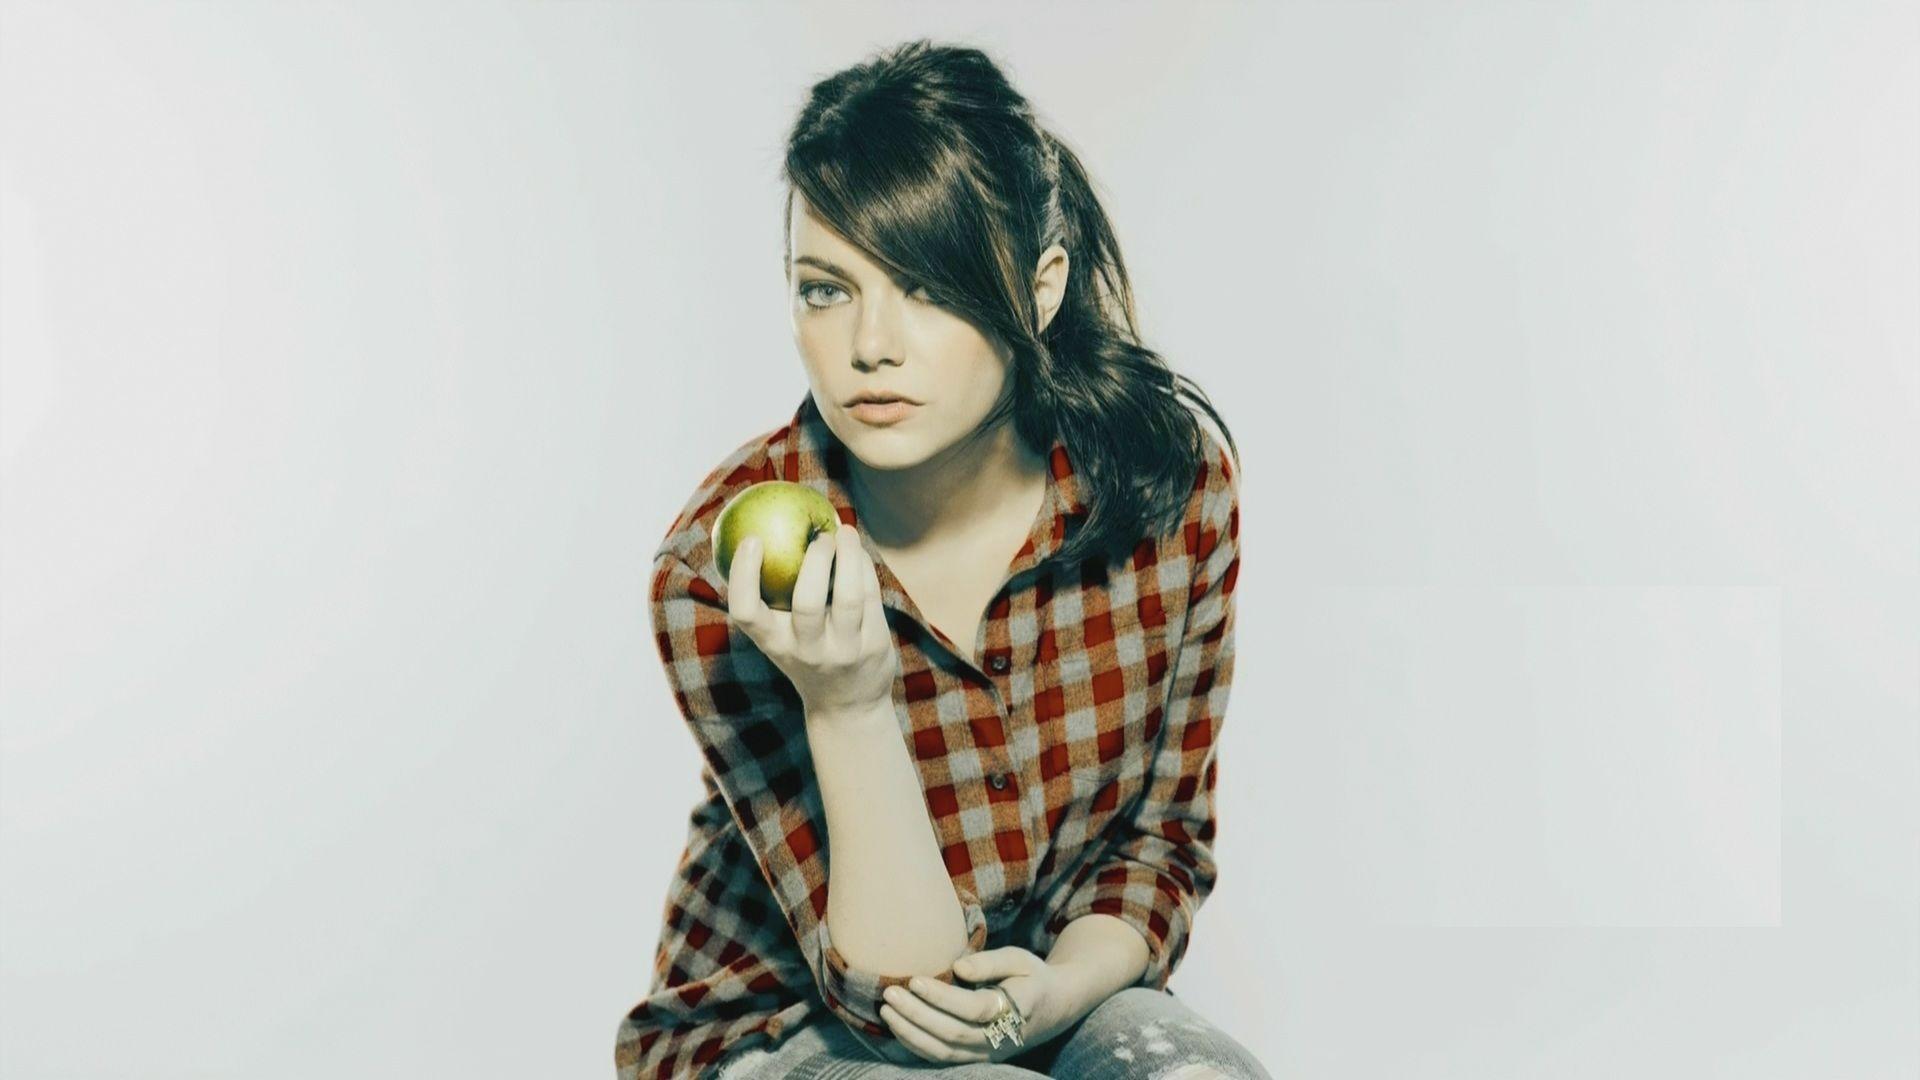 Emma Stone with an Apple Wallpaper